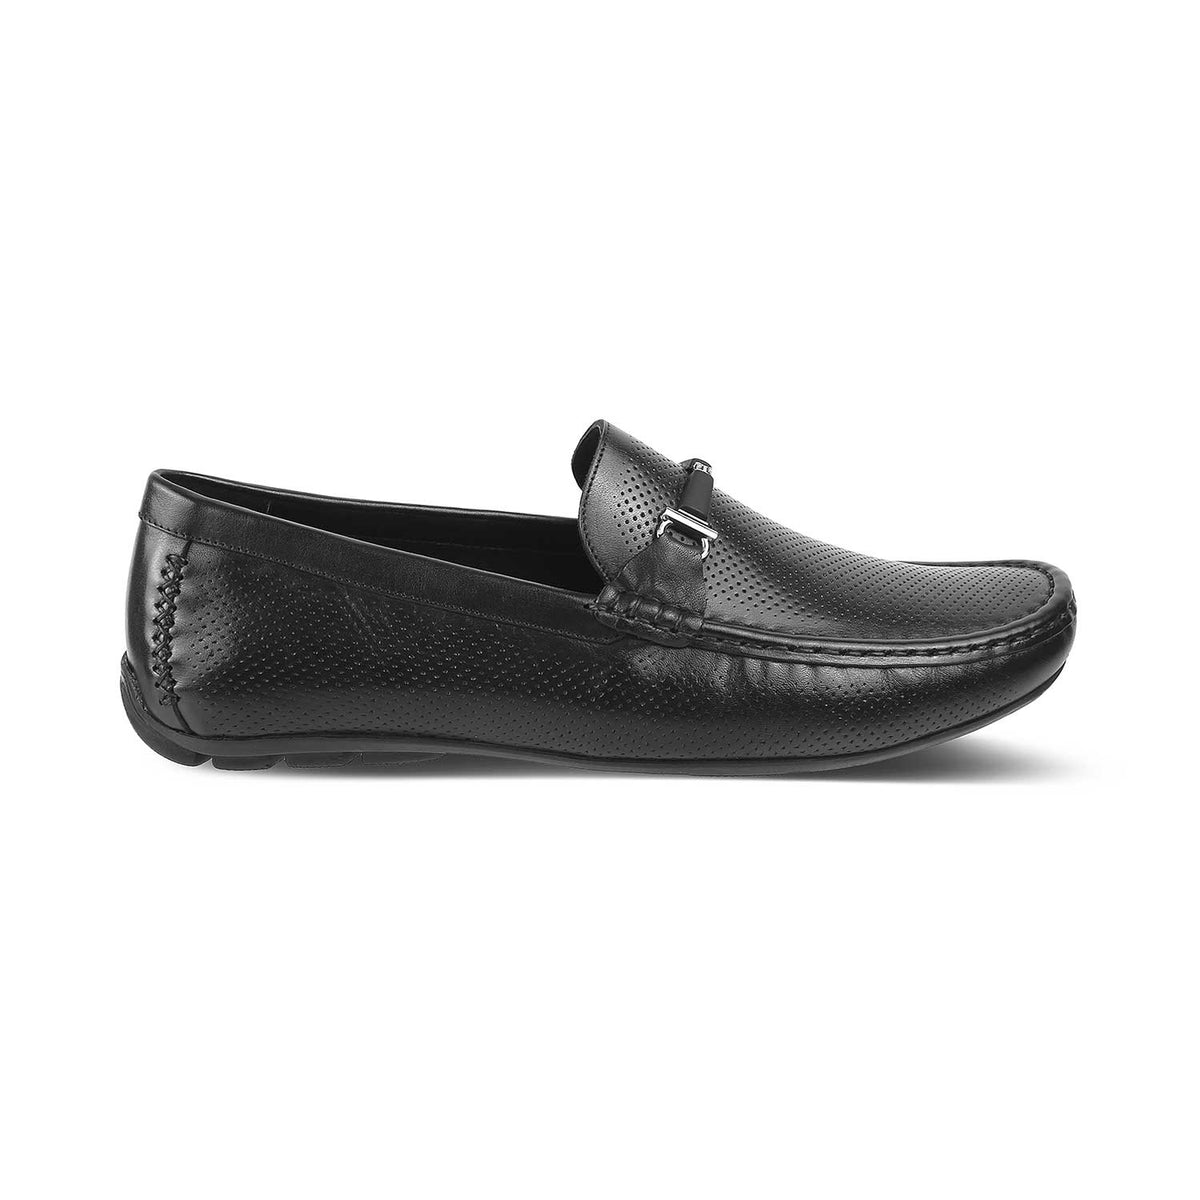 The Open Black Men's Leather Loafers - Tresmode